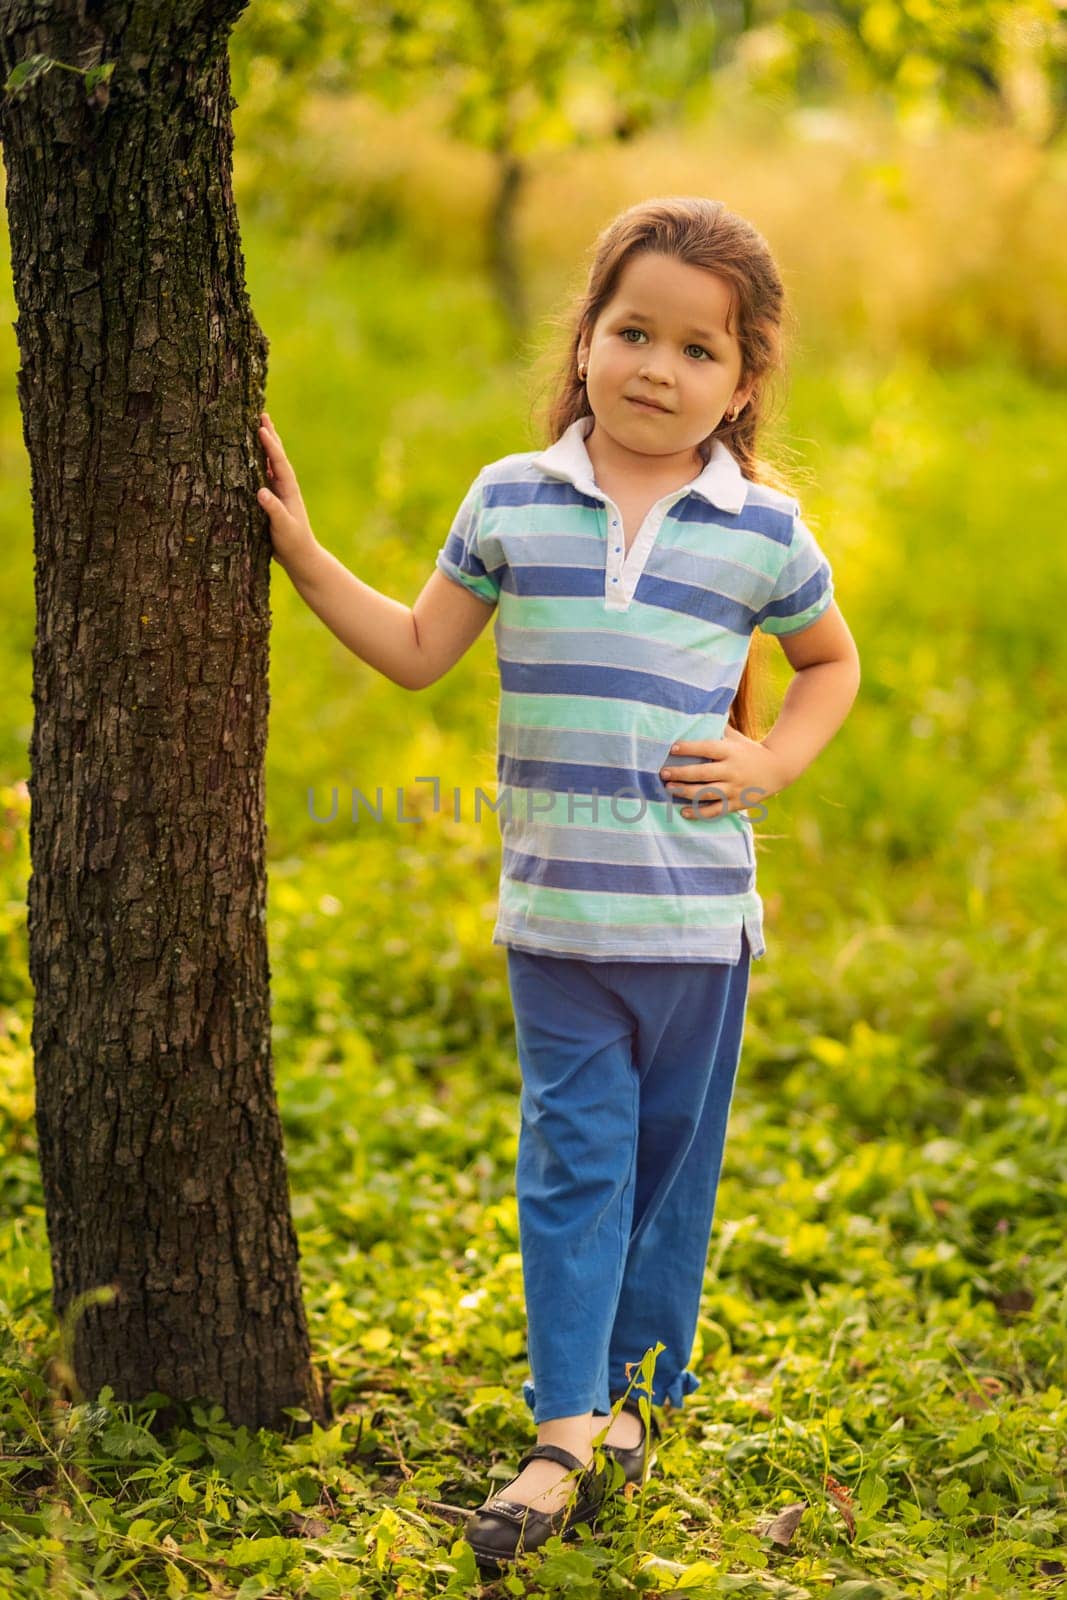 A child stands near a tree in the garden